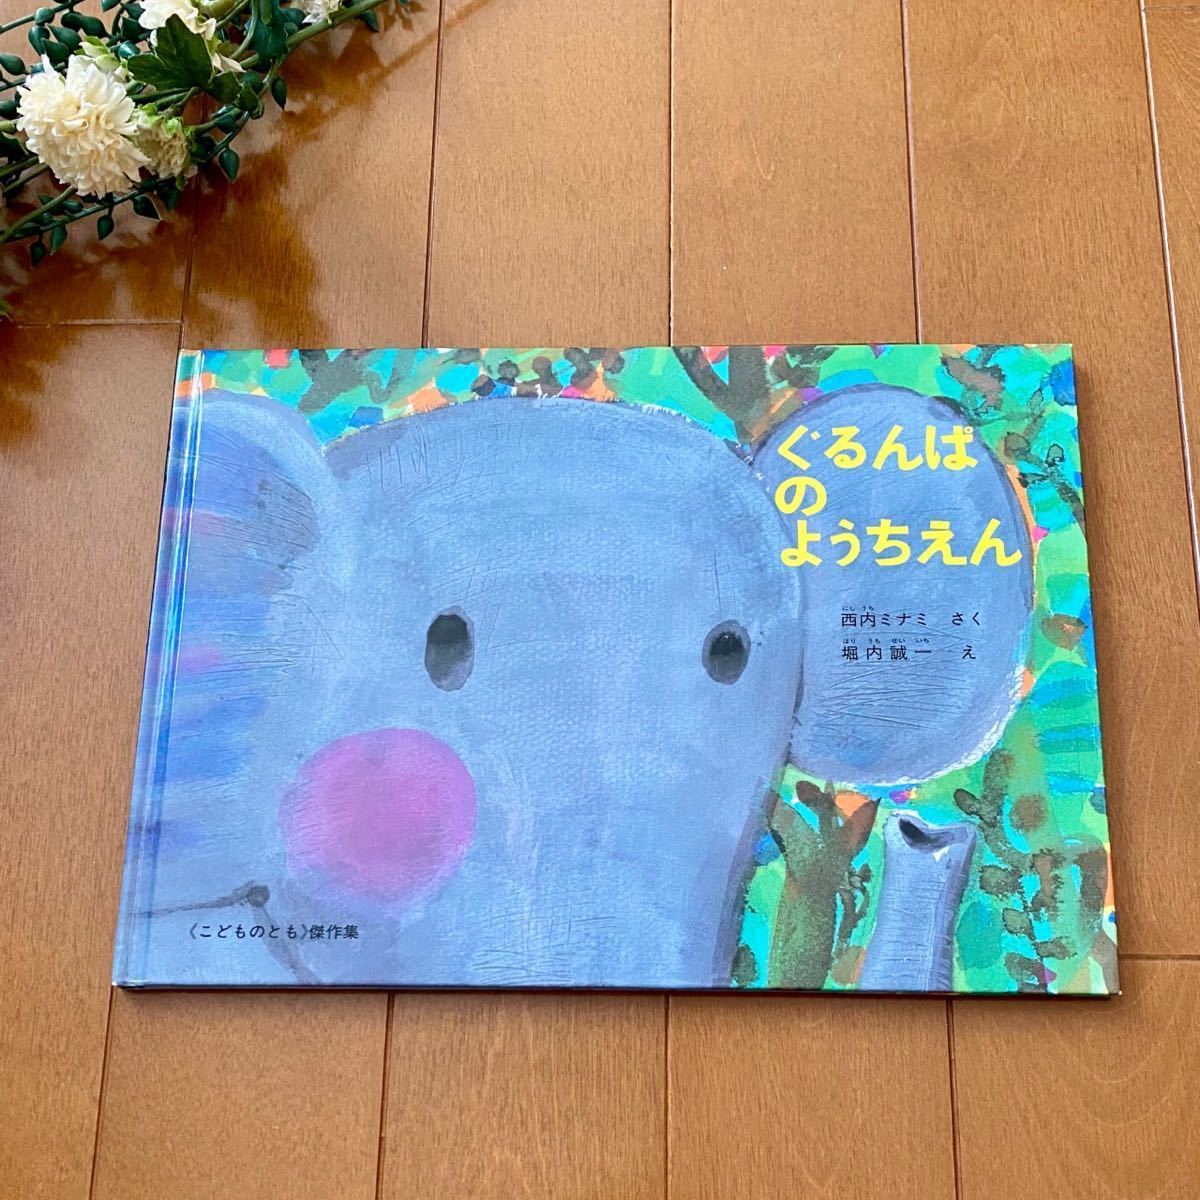 *..... for ...* kodomonotomo picture book reading ... child 4 -years old 5 -years old popular 